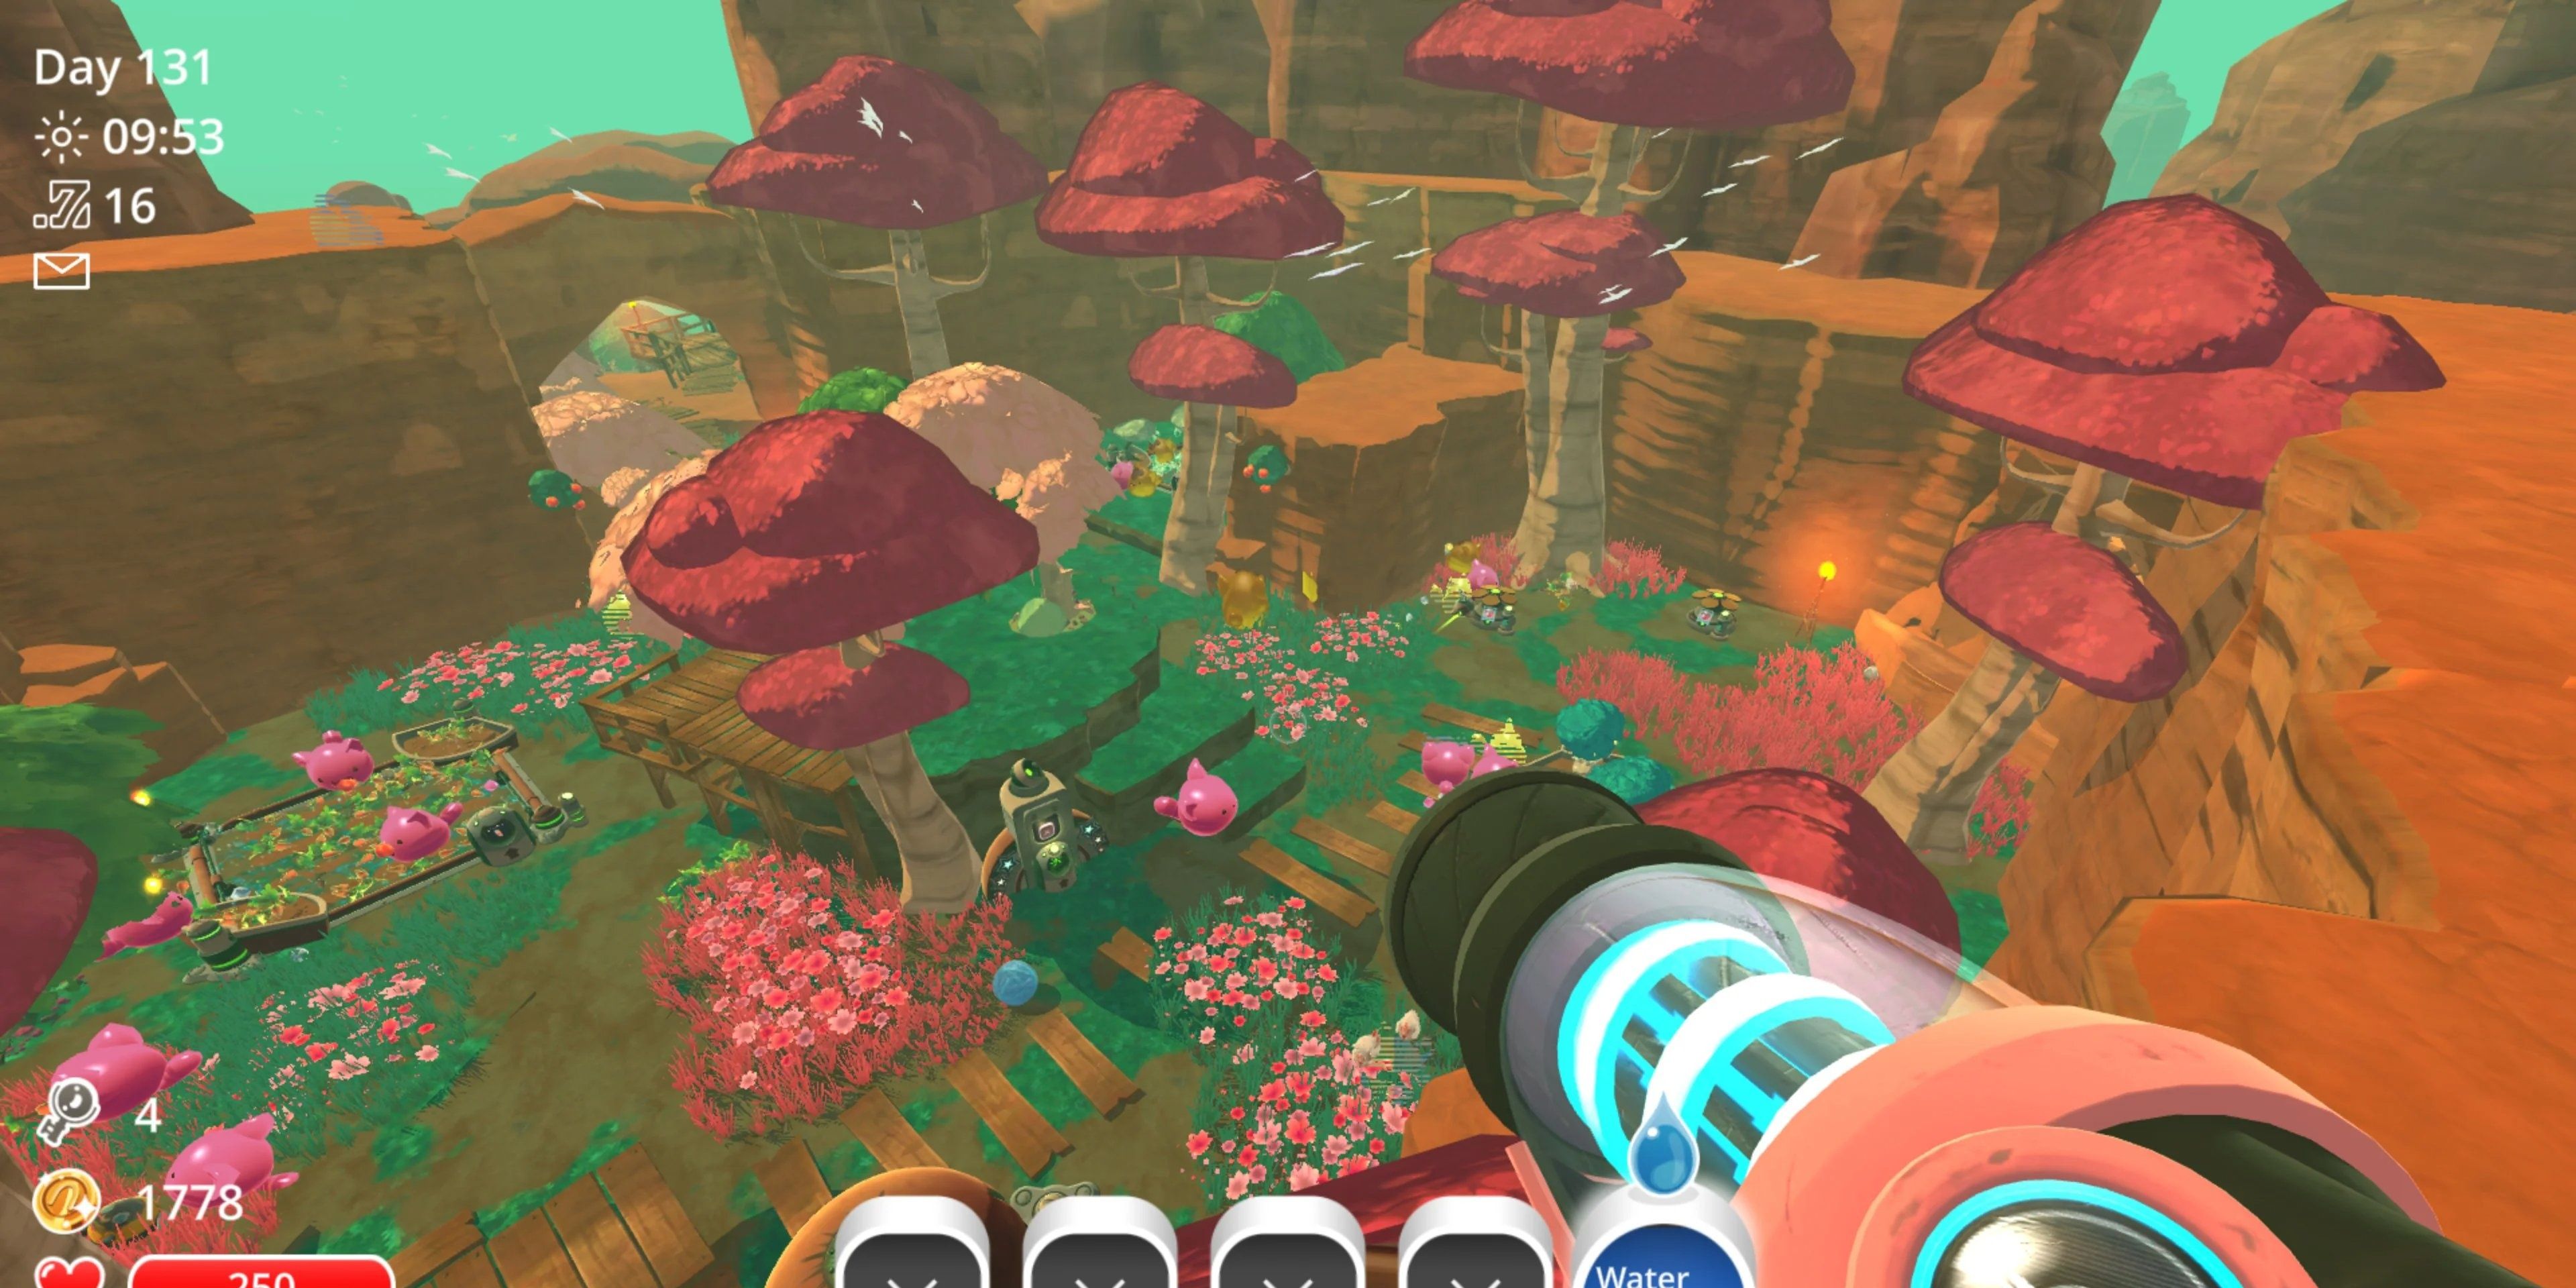 A distant look at The overgrowth expansion of the ranch in Slime Rancher